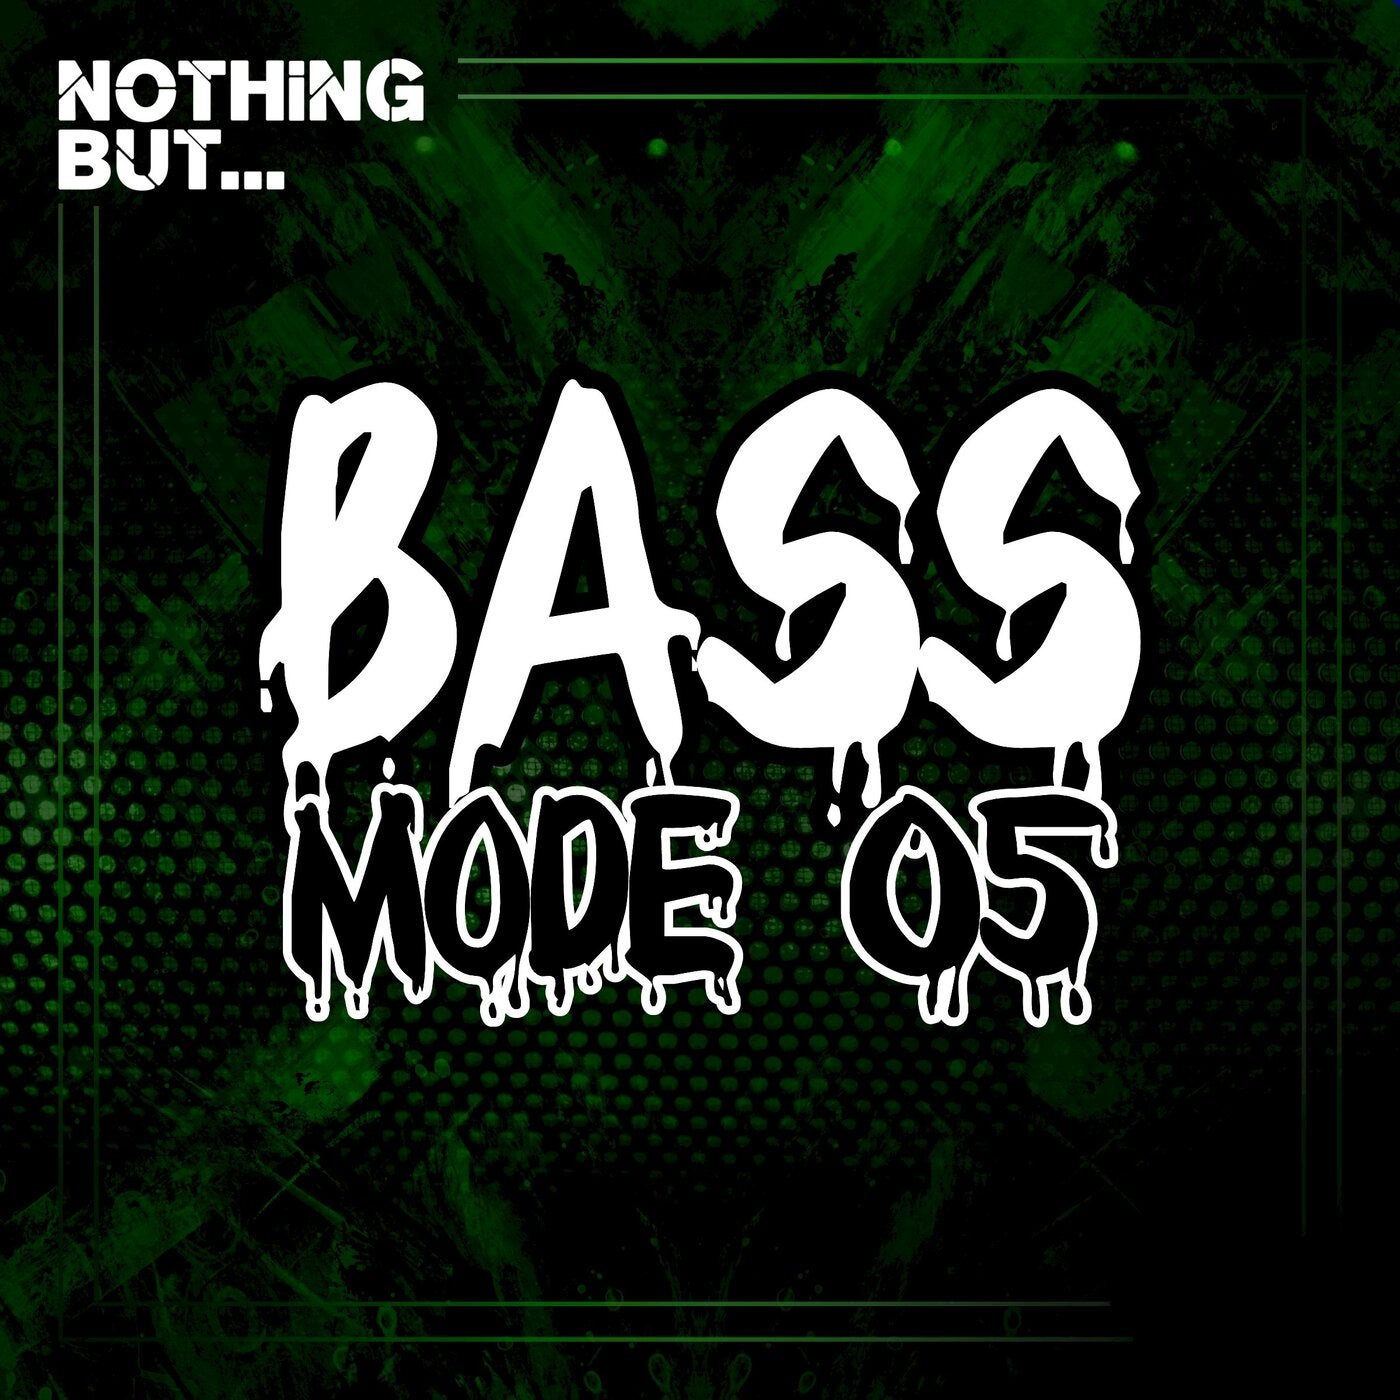 Nothing But... Bass Mode, Vol. 05